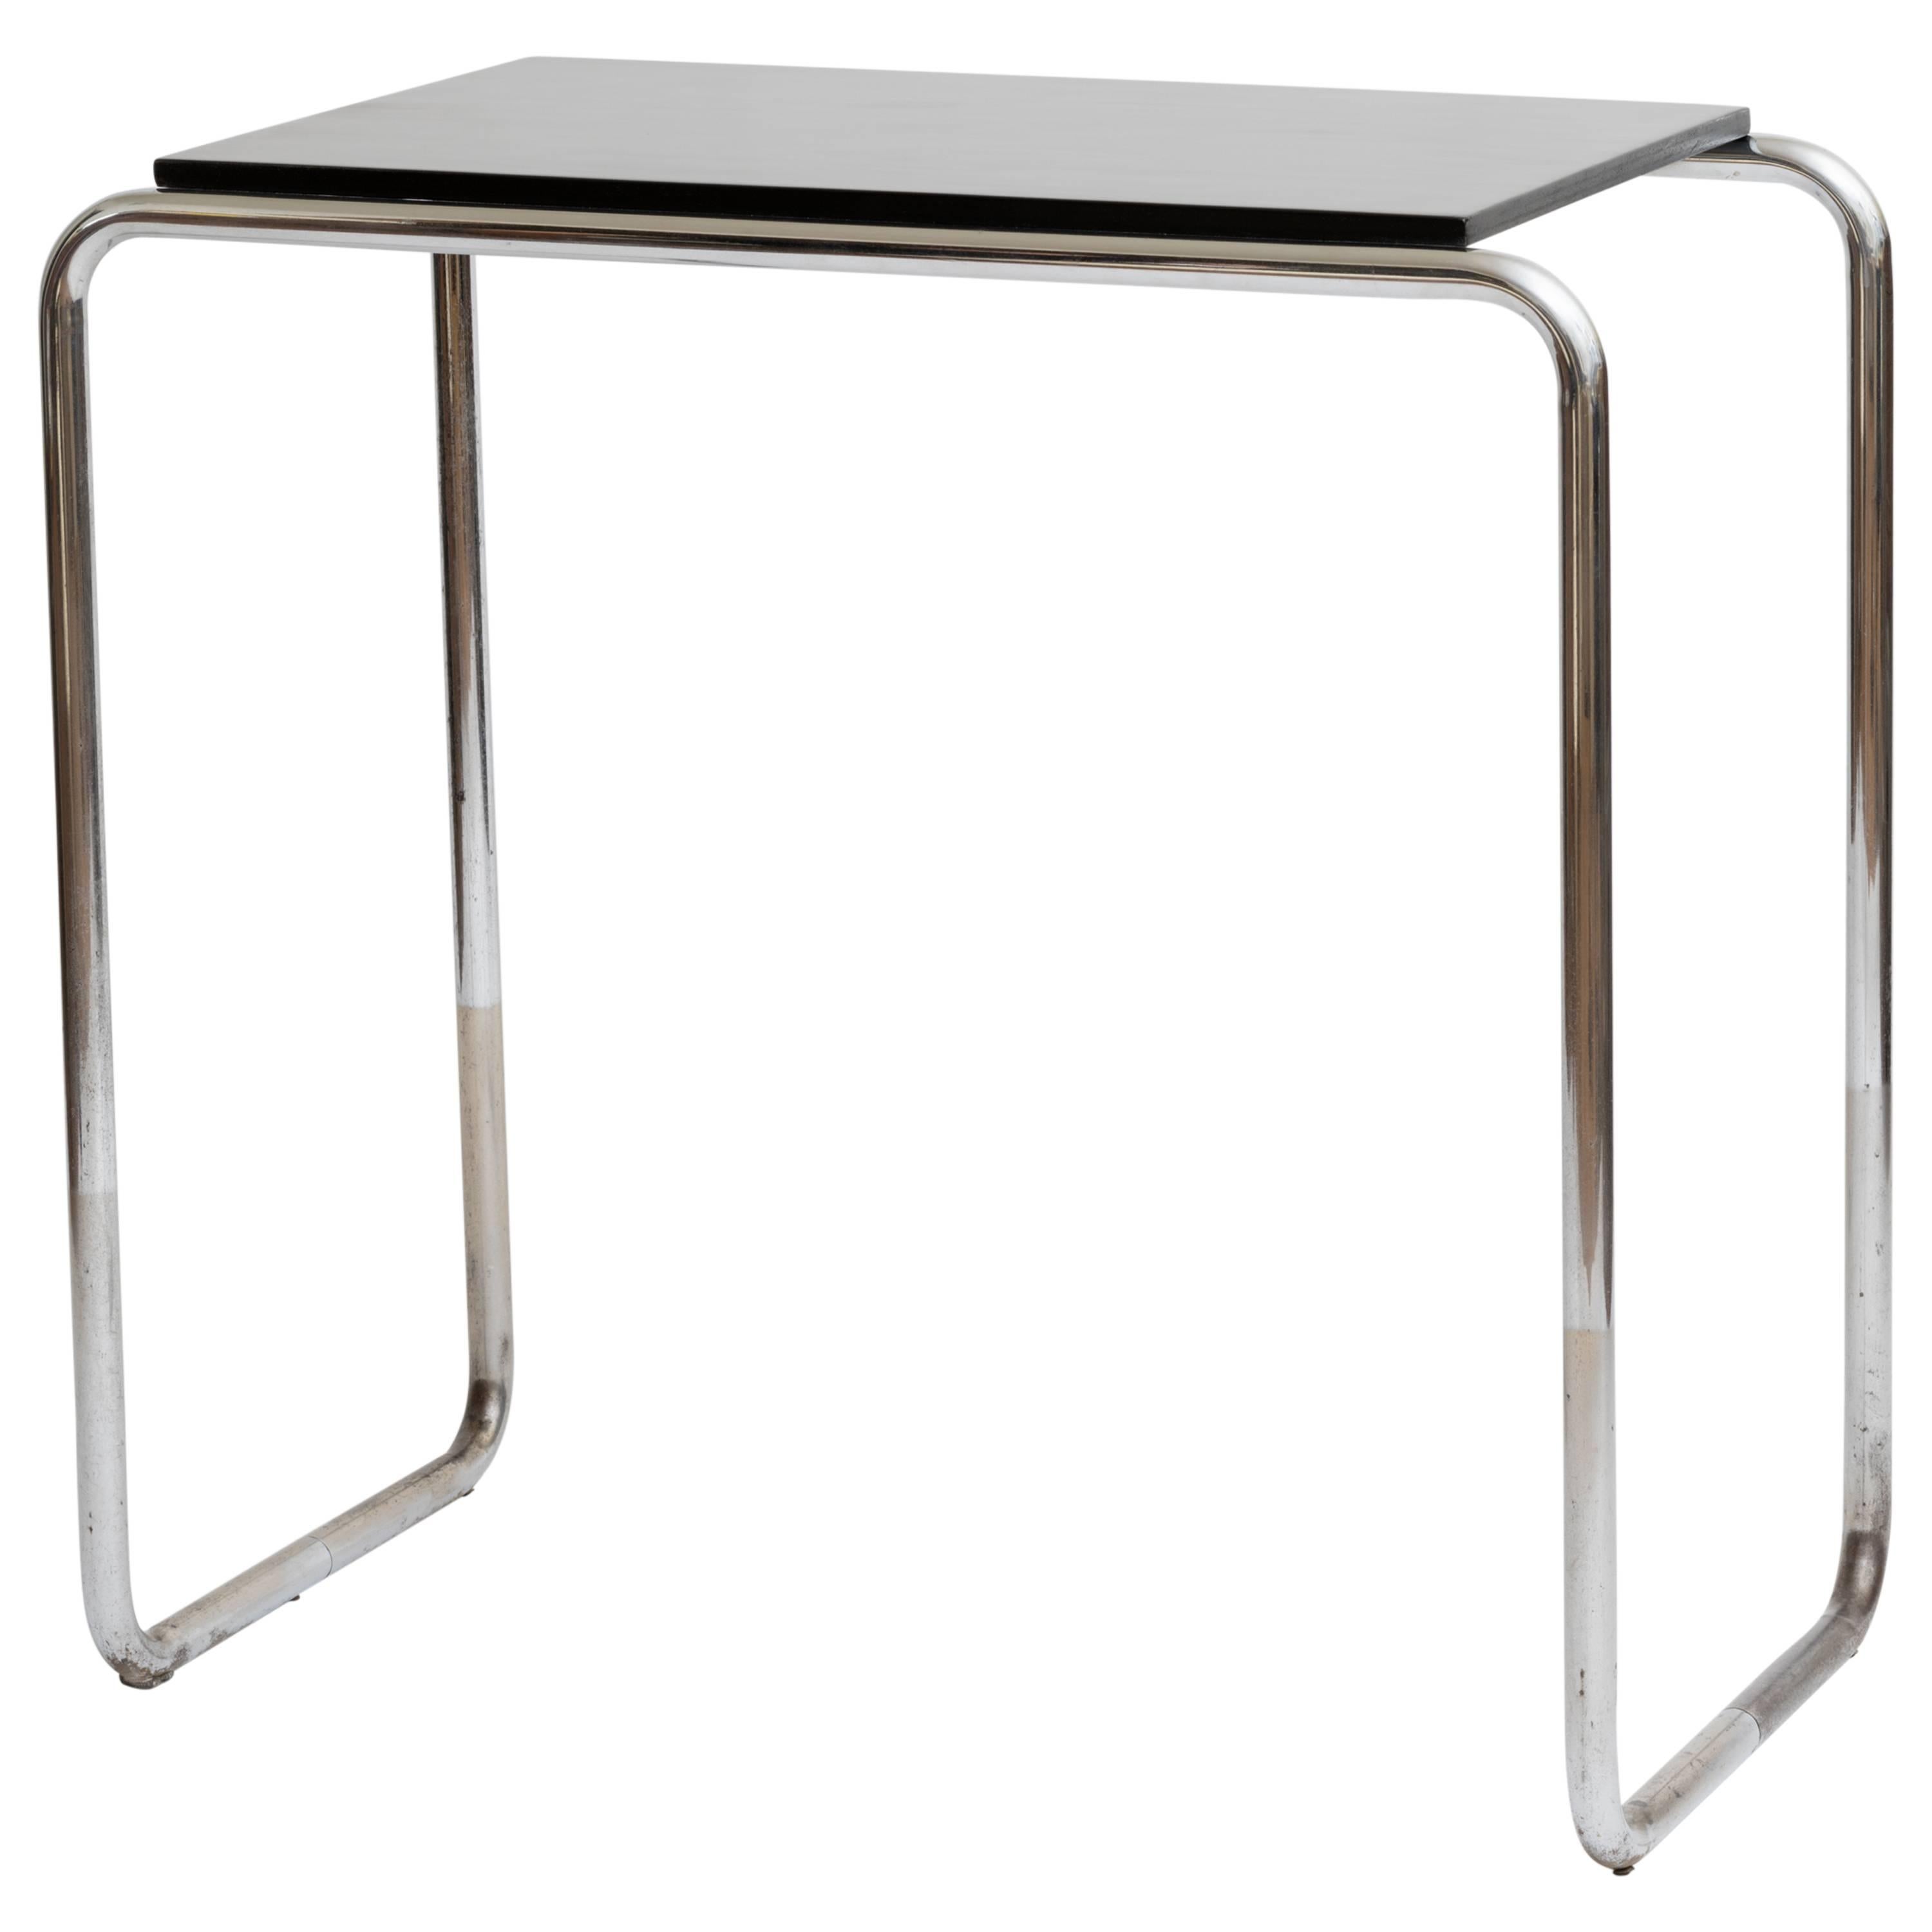 1930s Lacquered Bar Console Table in the Style of Marcel Breuer For Sale